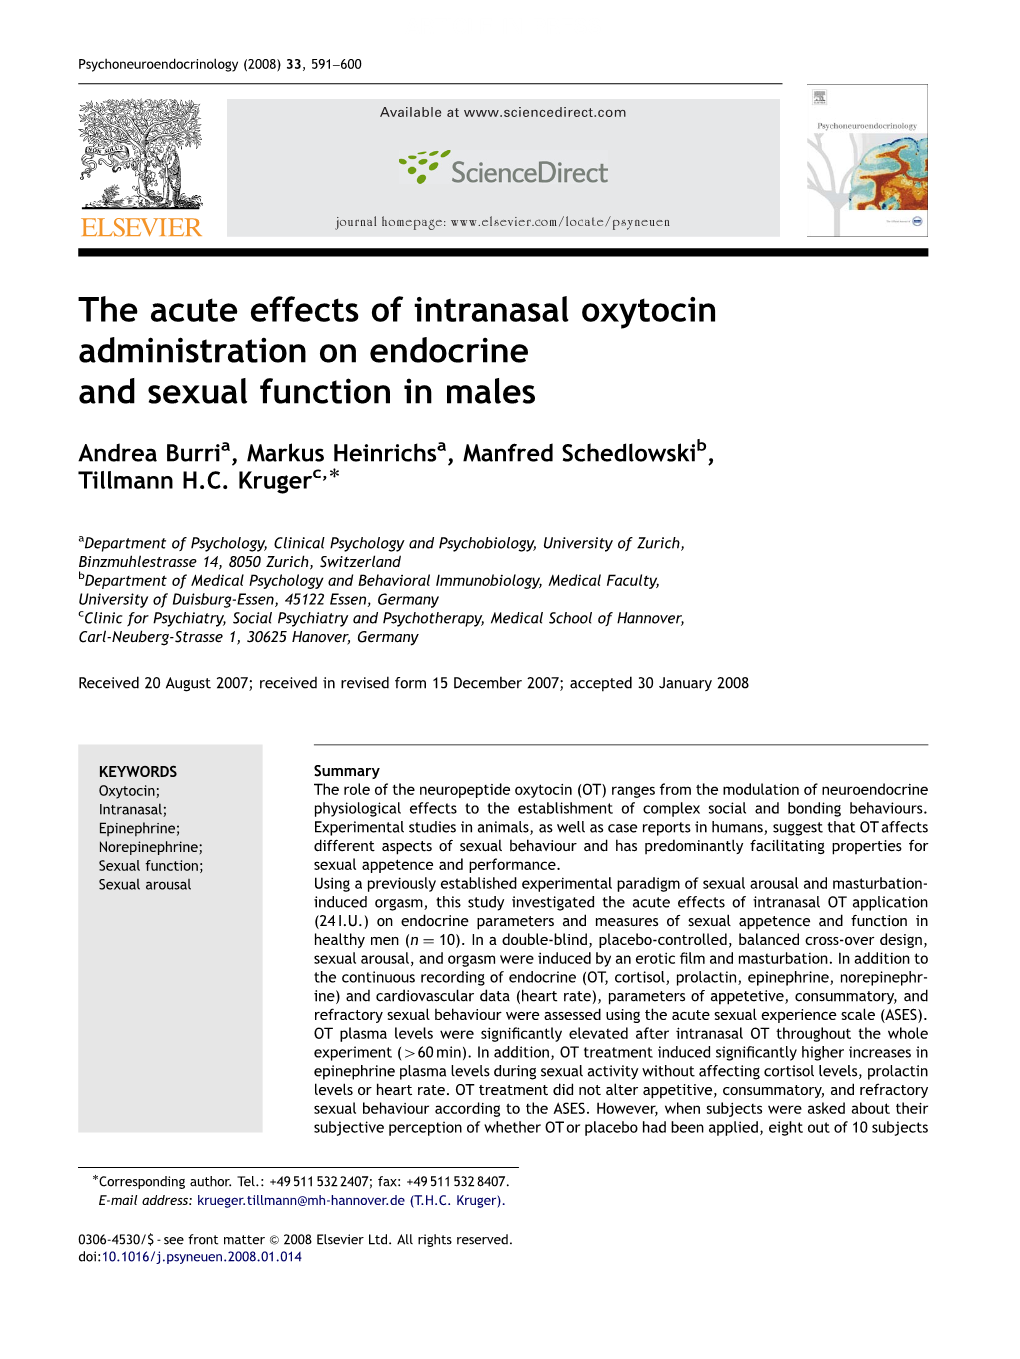 The Acute Effects of Intranasal Oxytocin Administration on Endocrine and Sexual Function in Males